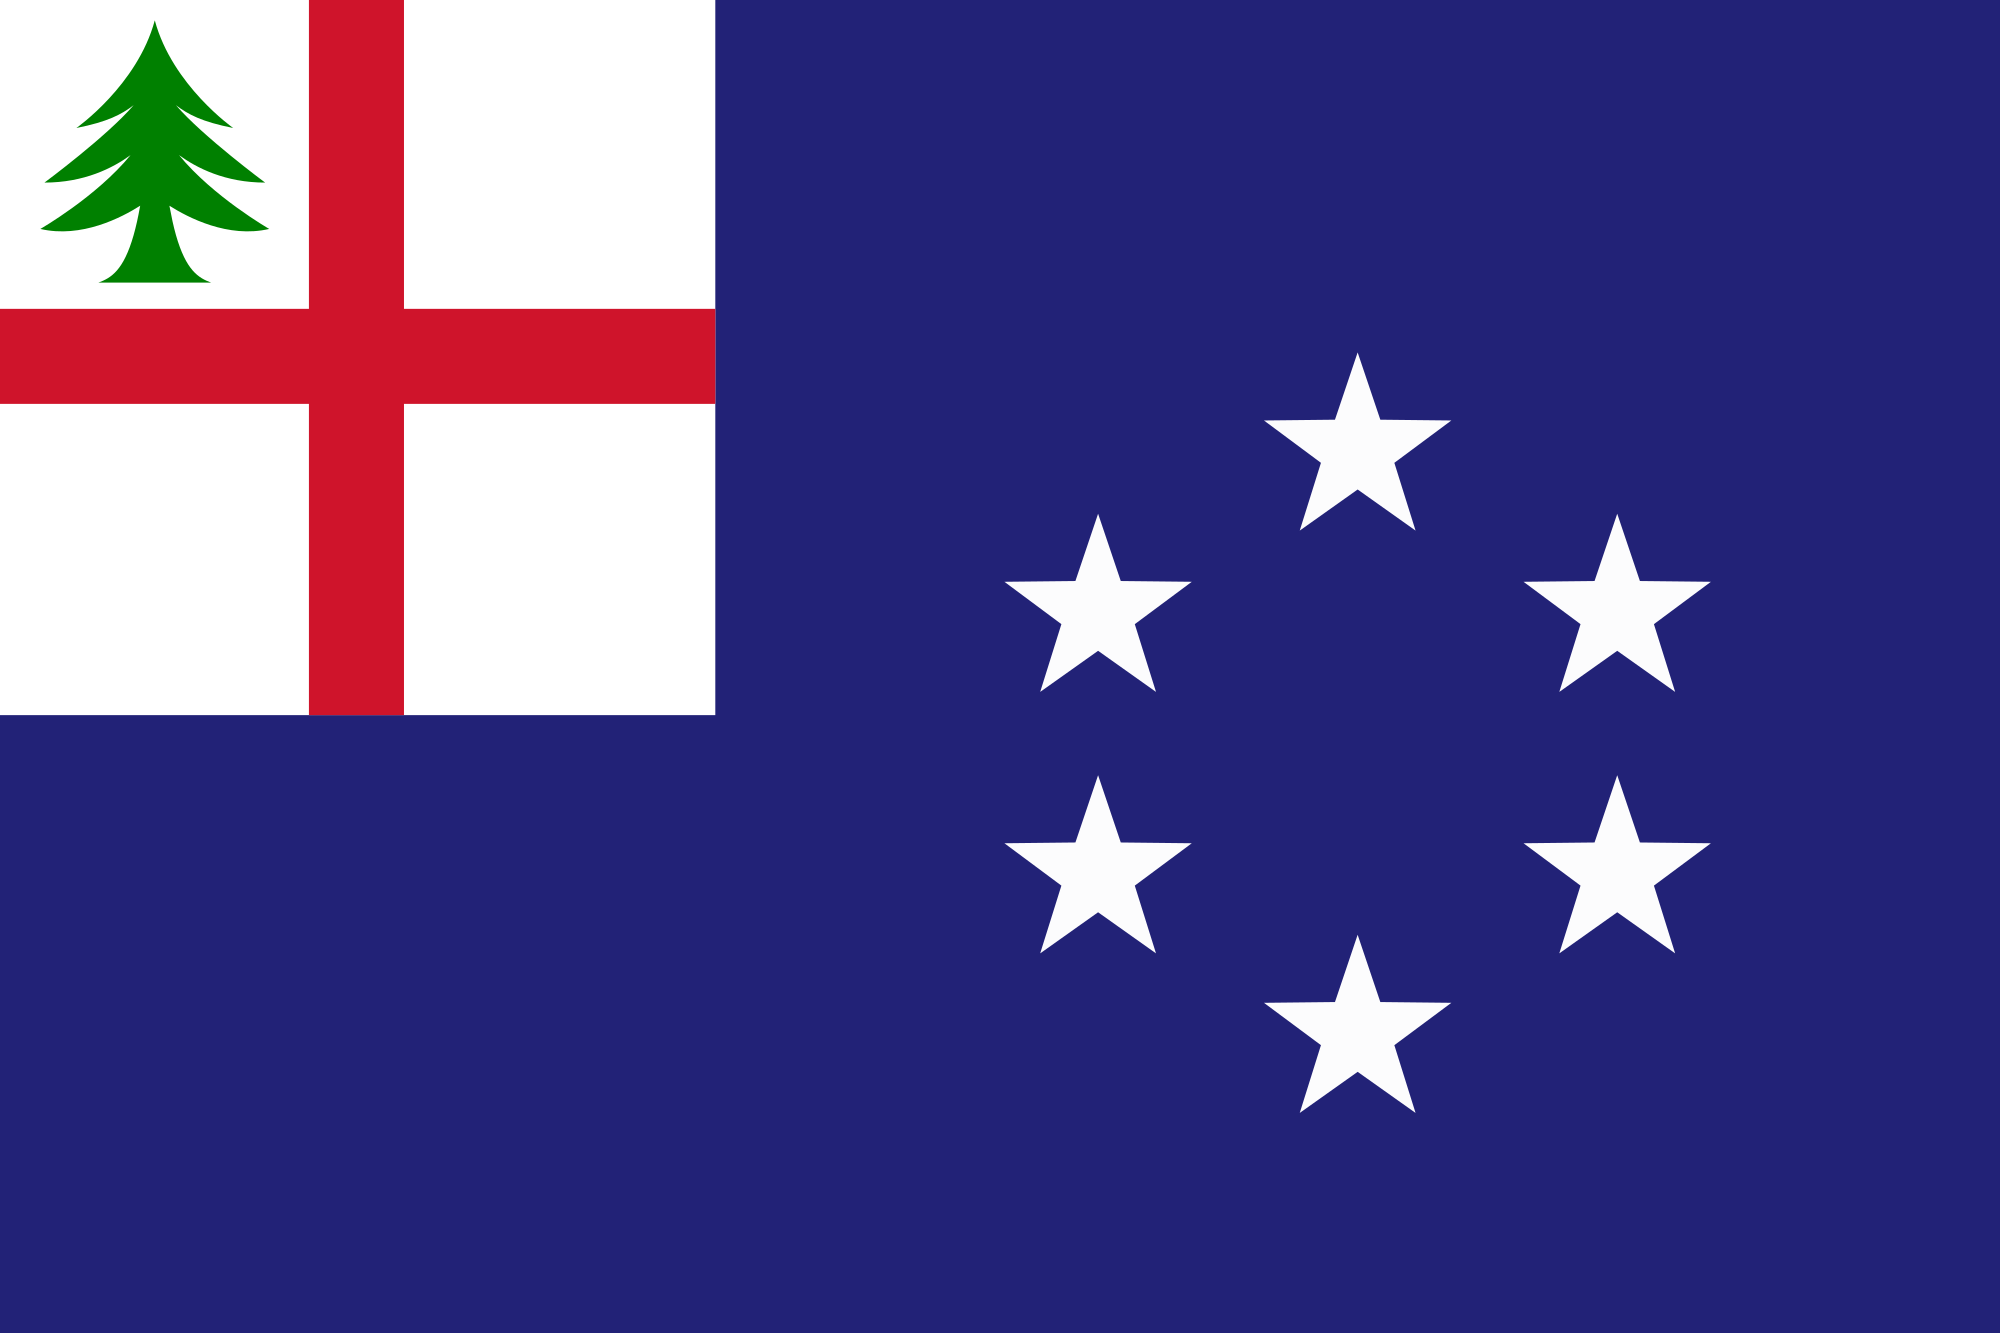 2000px-New_England_flag_1988.svg.png